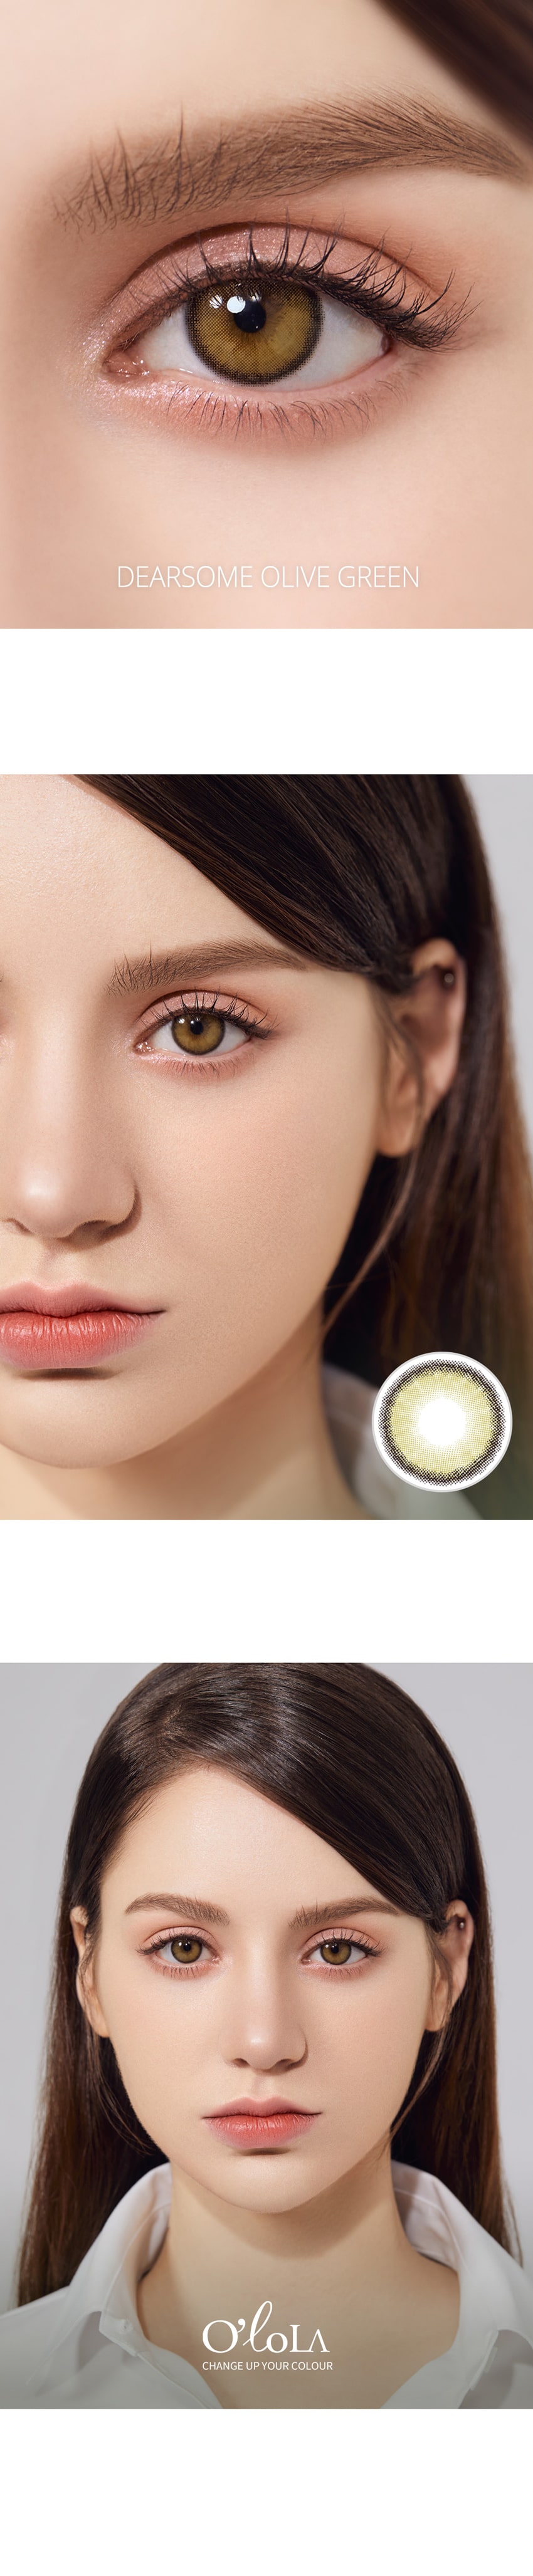 queencontacts, olola, dearsome, popular Korean, colored contacts, olive, green, popular makeup